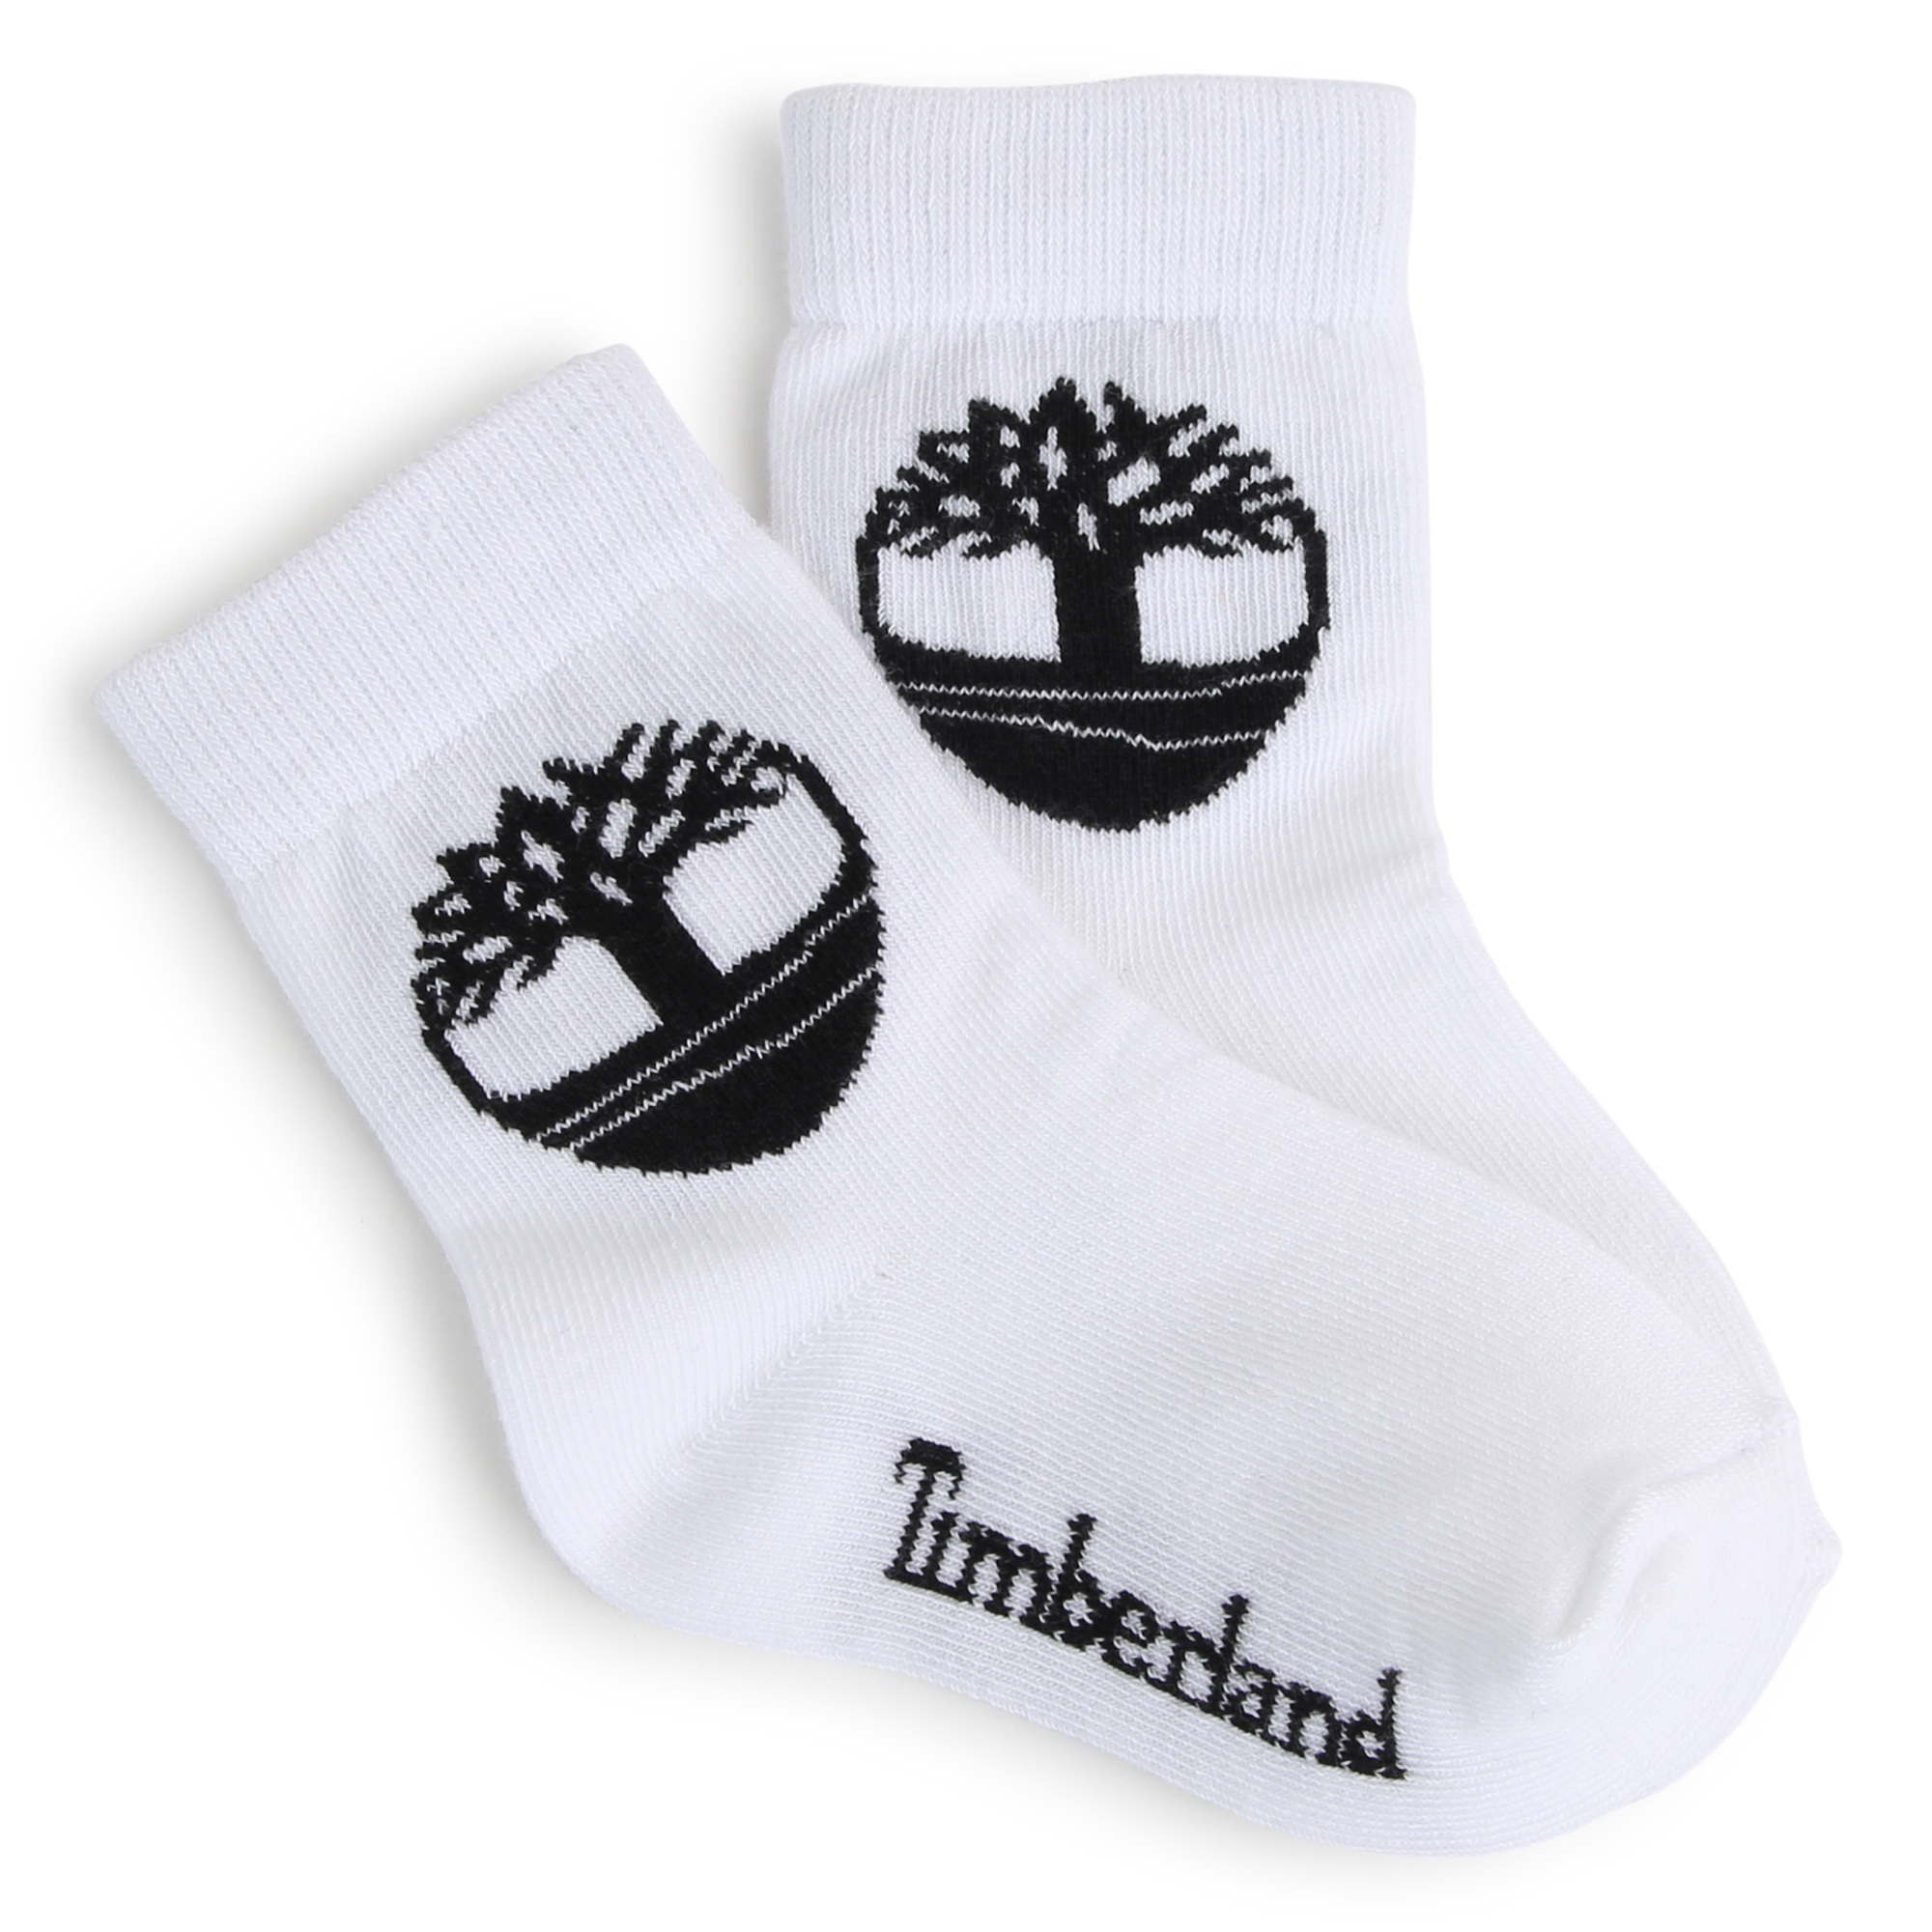 Set of 3 pairs of socks TIMBERLAND for BOY